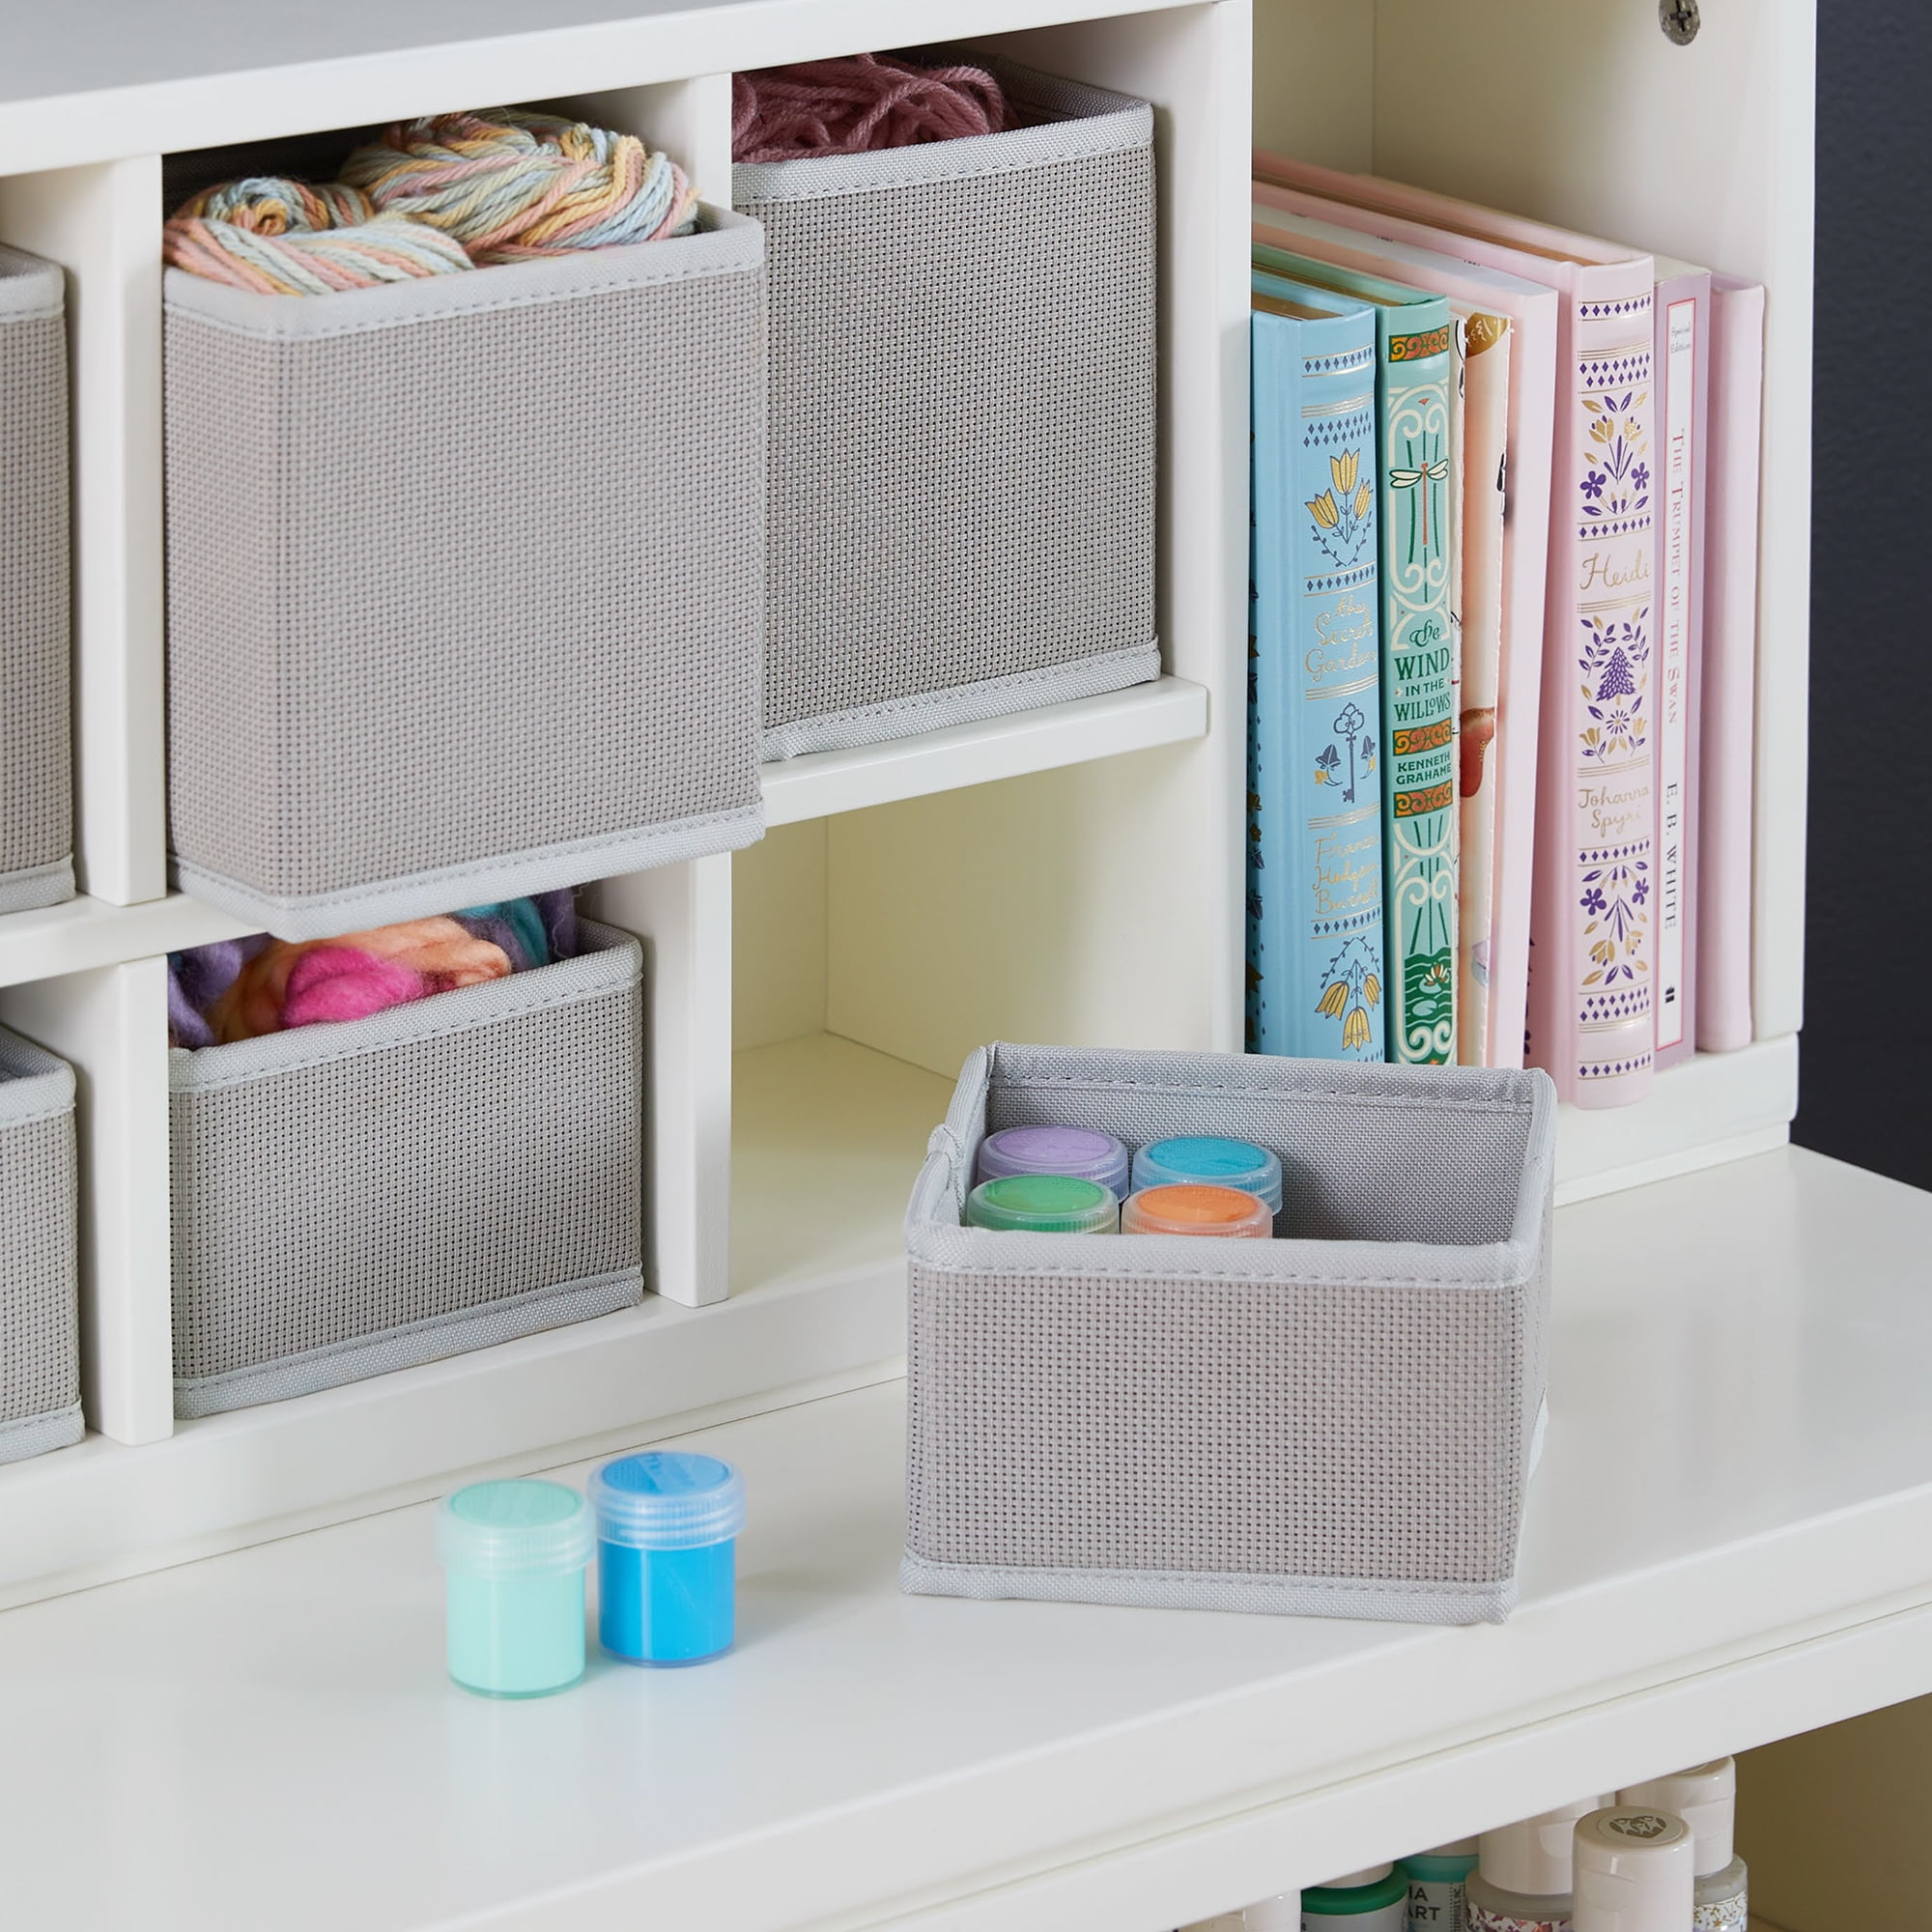 Martha Stewart Crafting Kids' Cubby Organizer - Gray, Wooden Tabletop Arts  and Crafts Storage with Bins for Paint, Paper, Brushes, and Artwork